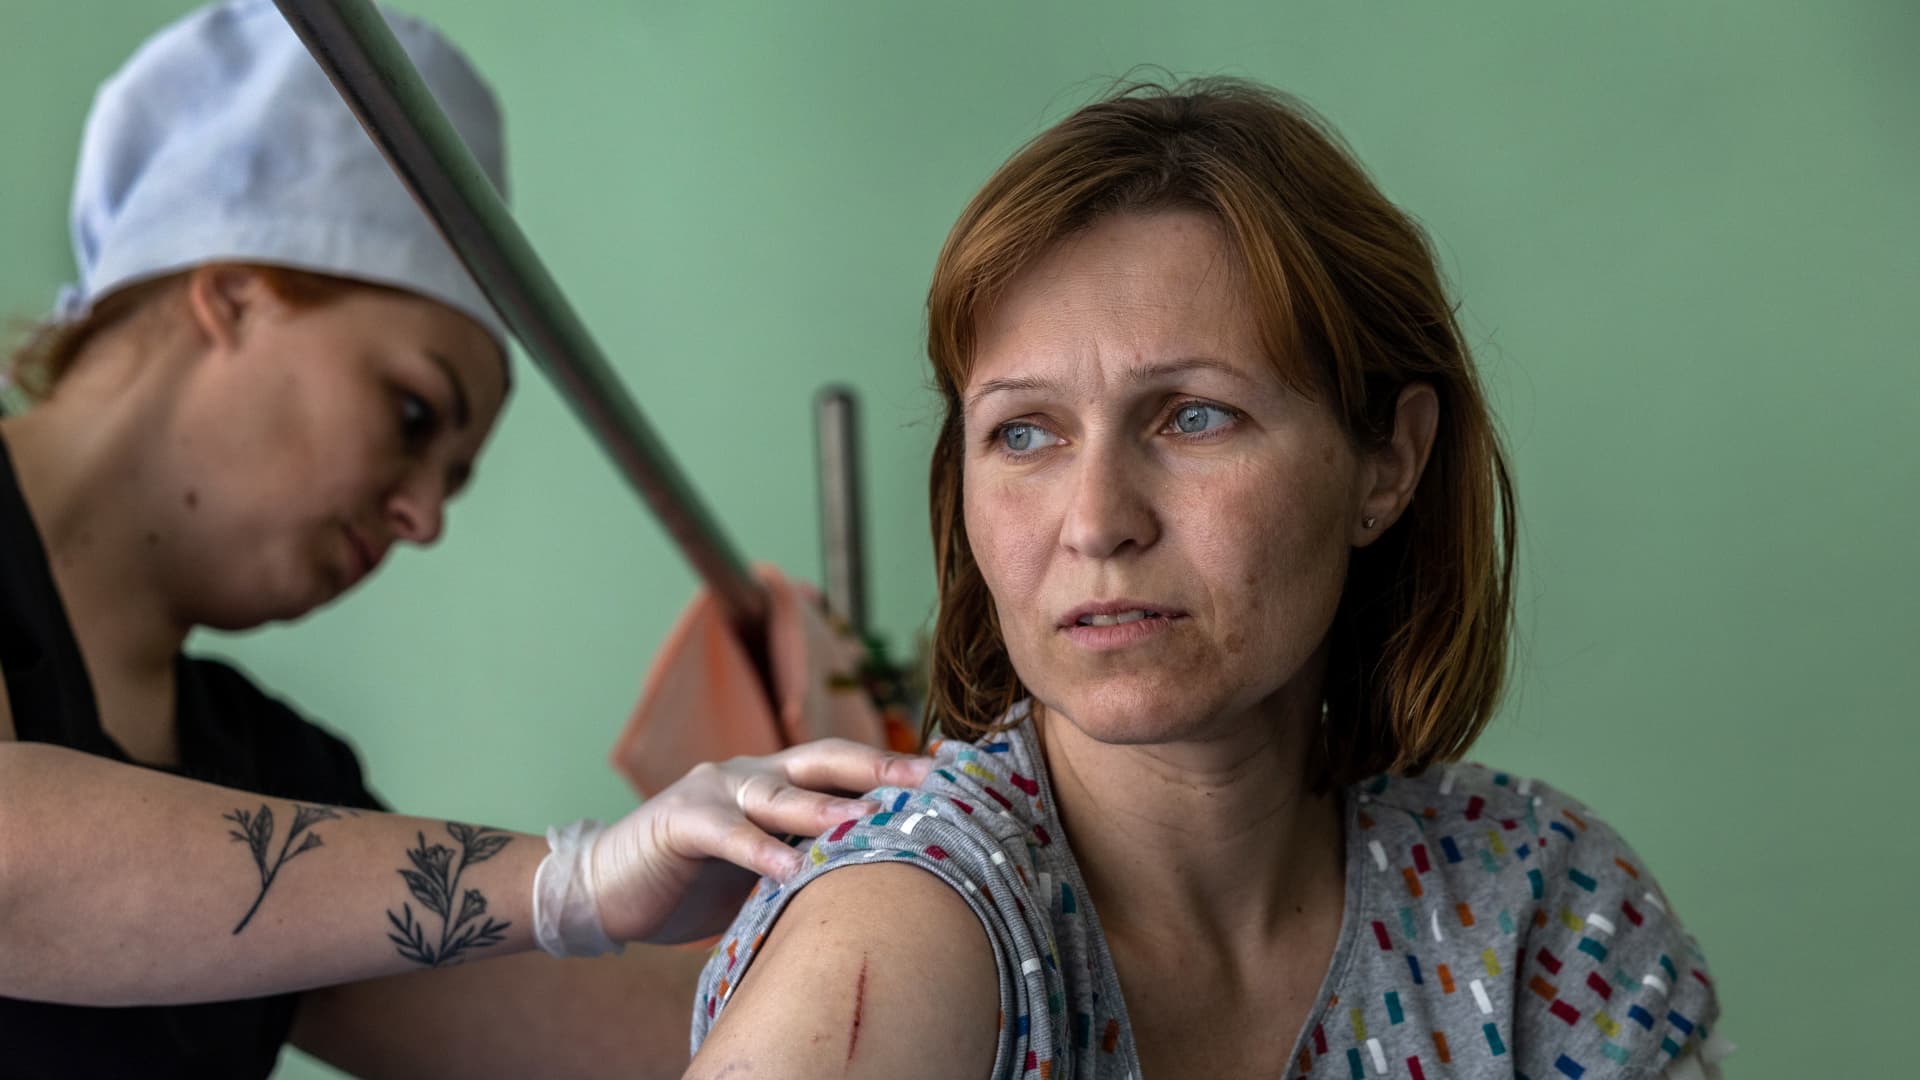 A nurse checks the wounds of Ponomareva Natalia Sergiivna, 51, only three days after her family's home was shelled by Russian forces in their frontline village of Vysokopilla in the Kherson region of southern Ukraine on May 05, 2022 in Kryvyi Rih, Ukraine.